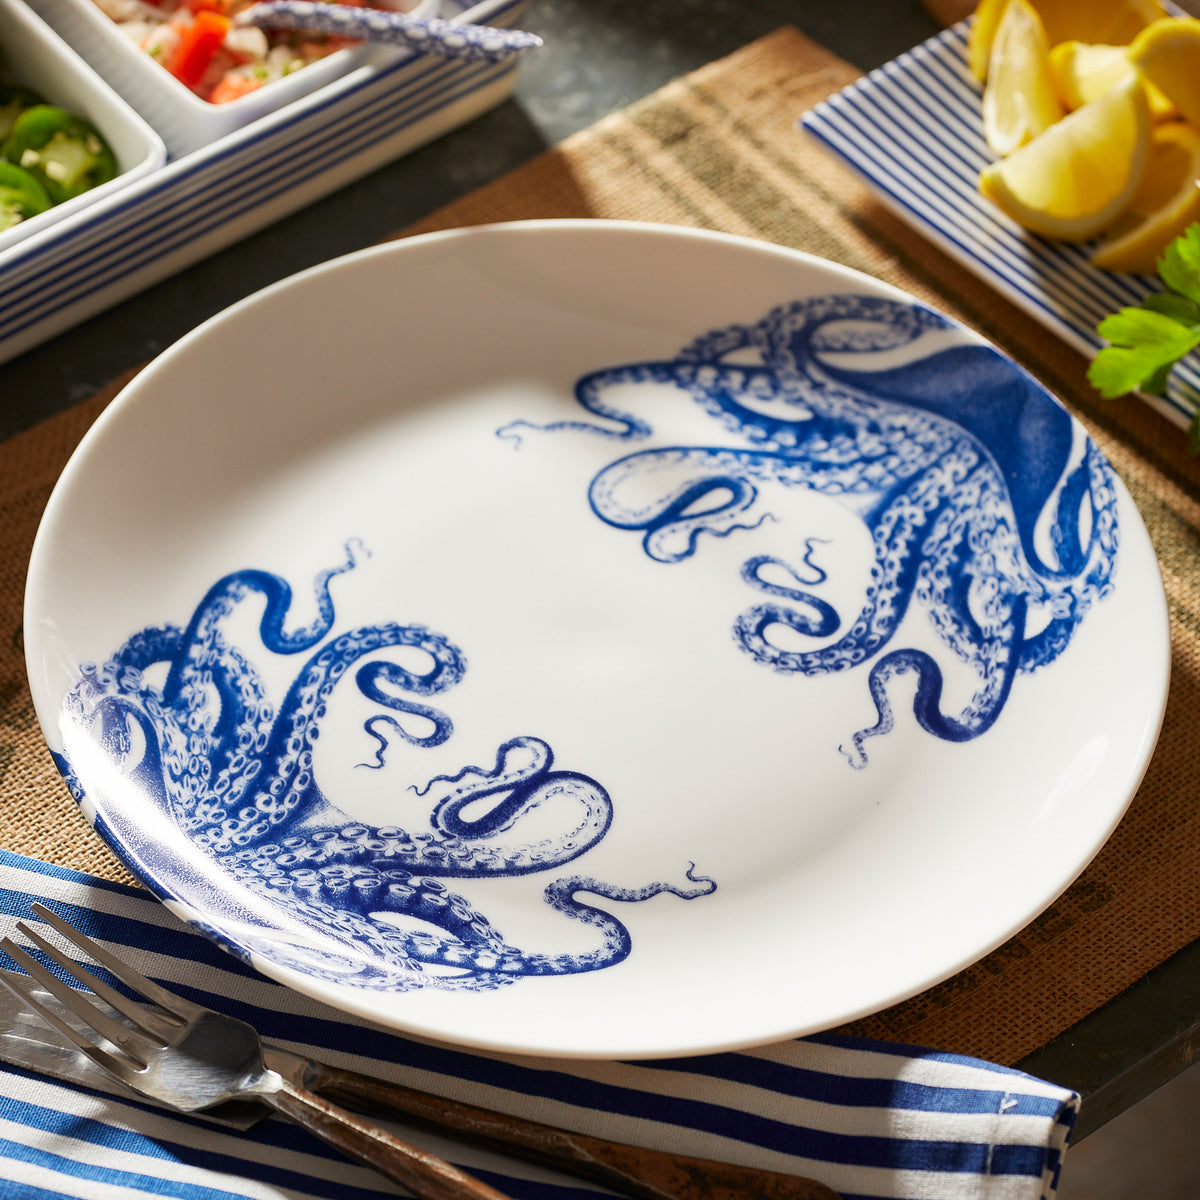 A Lucy Blue Coupe Dinner Plate with an octopus on it from Caskata Artisanal Home.